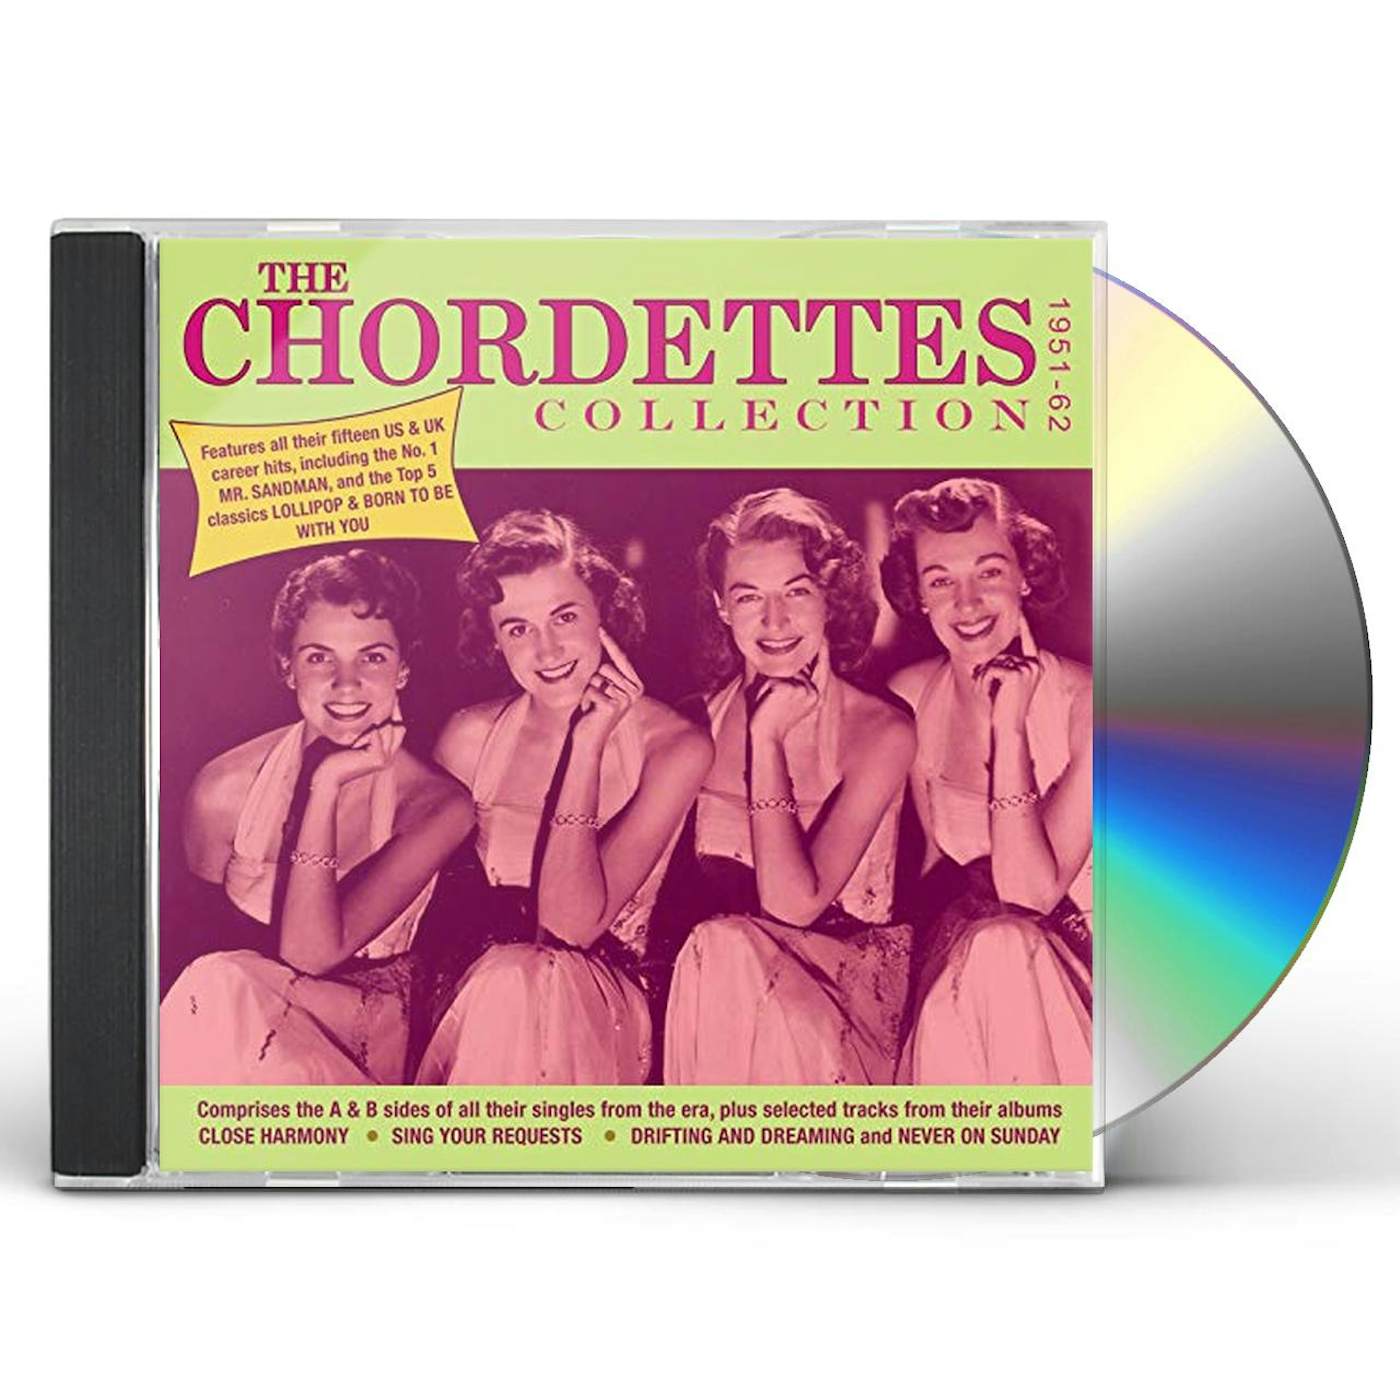 The Chordettes COLLECTION 1951-62 CD